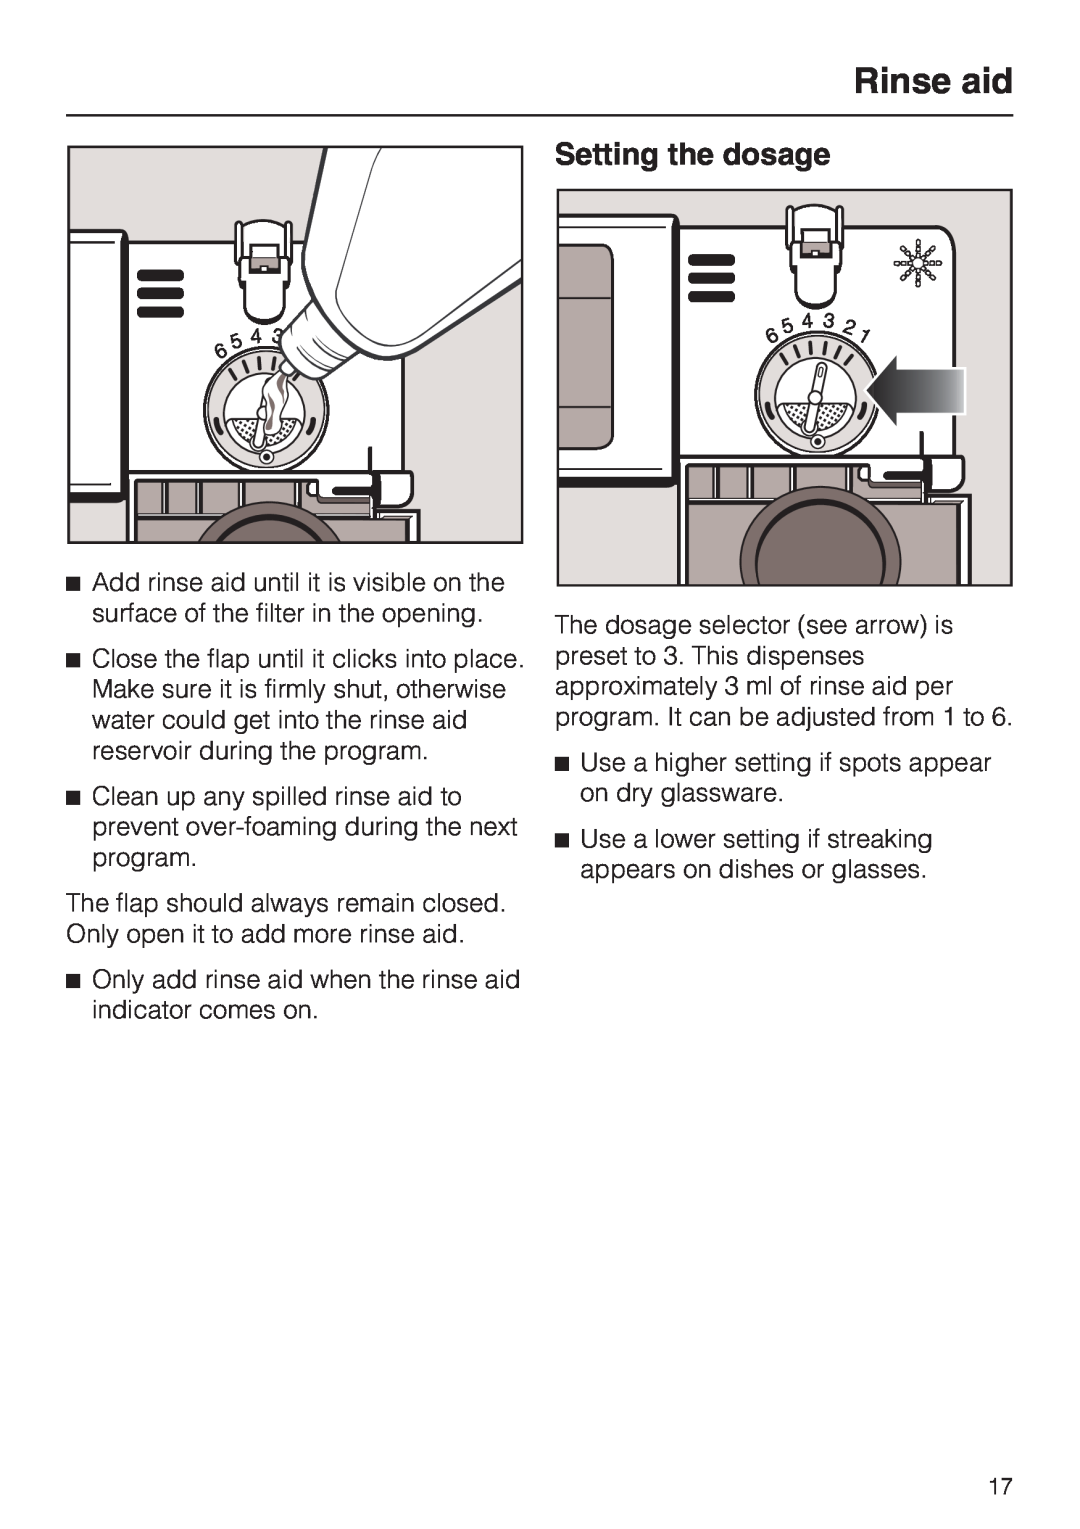 Miele 06 868 521, G 7856 installation instructions Setting the dosage, Rinse aid 